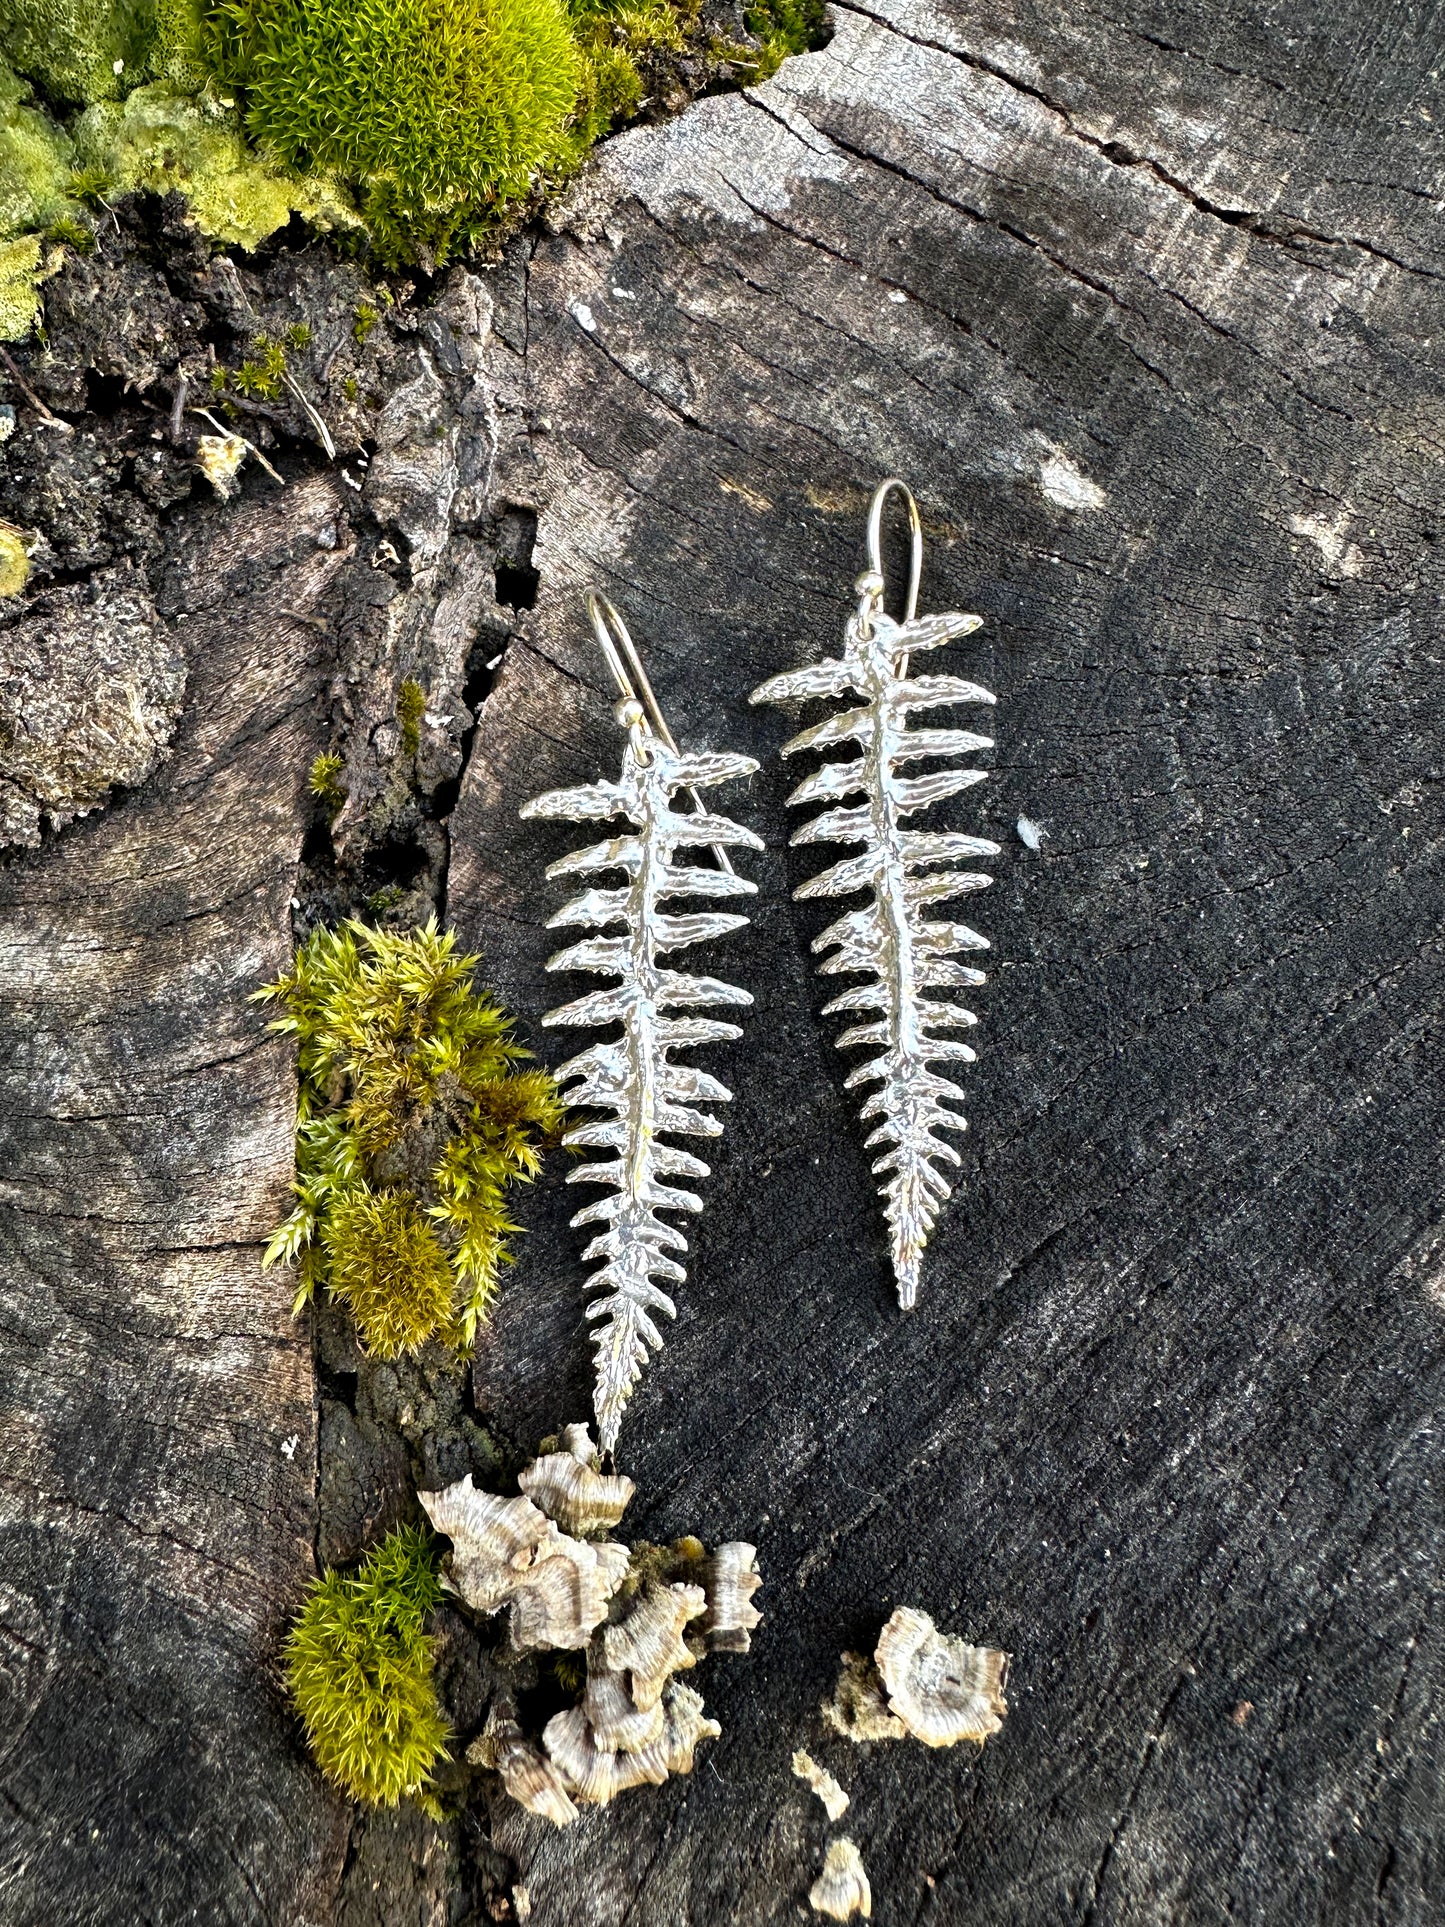 FERN | Handcrafted Fern Earrings | Recycled Sterling Silver | Made in Maine | Free Shipping